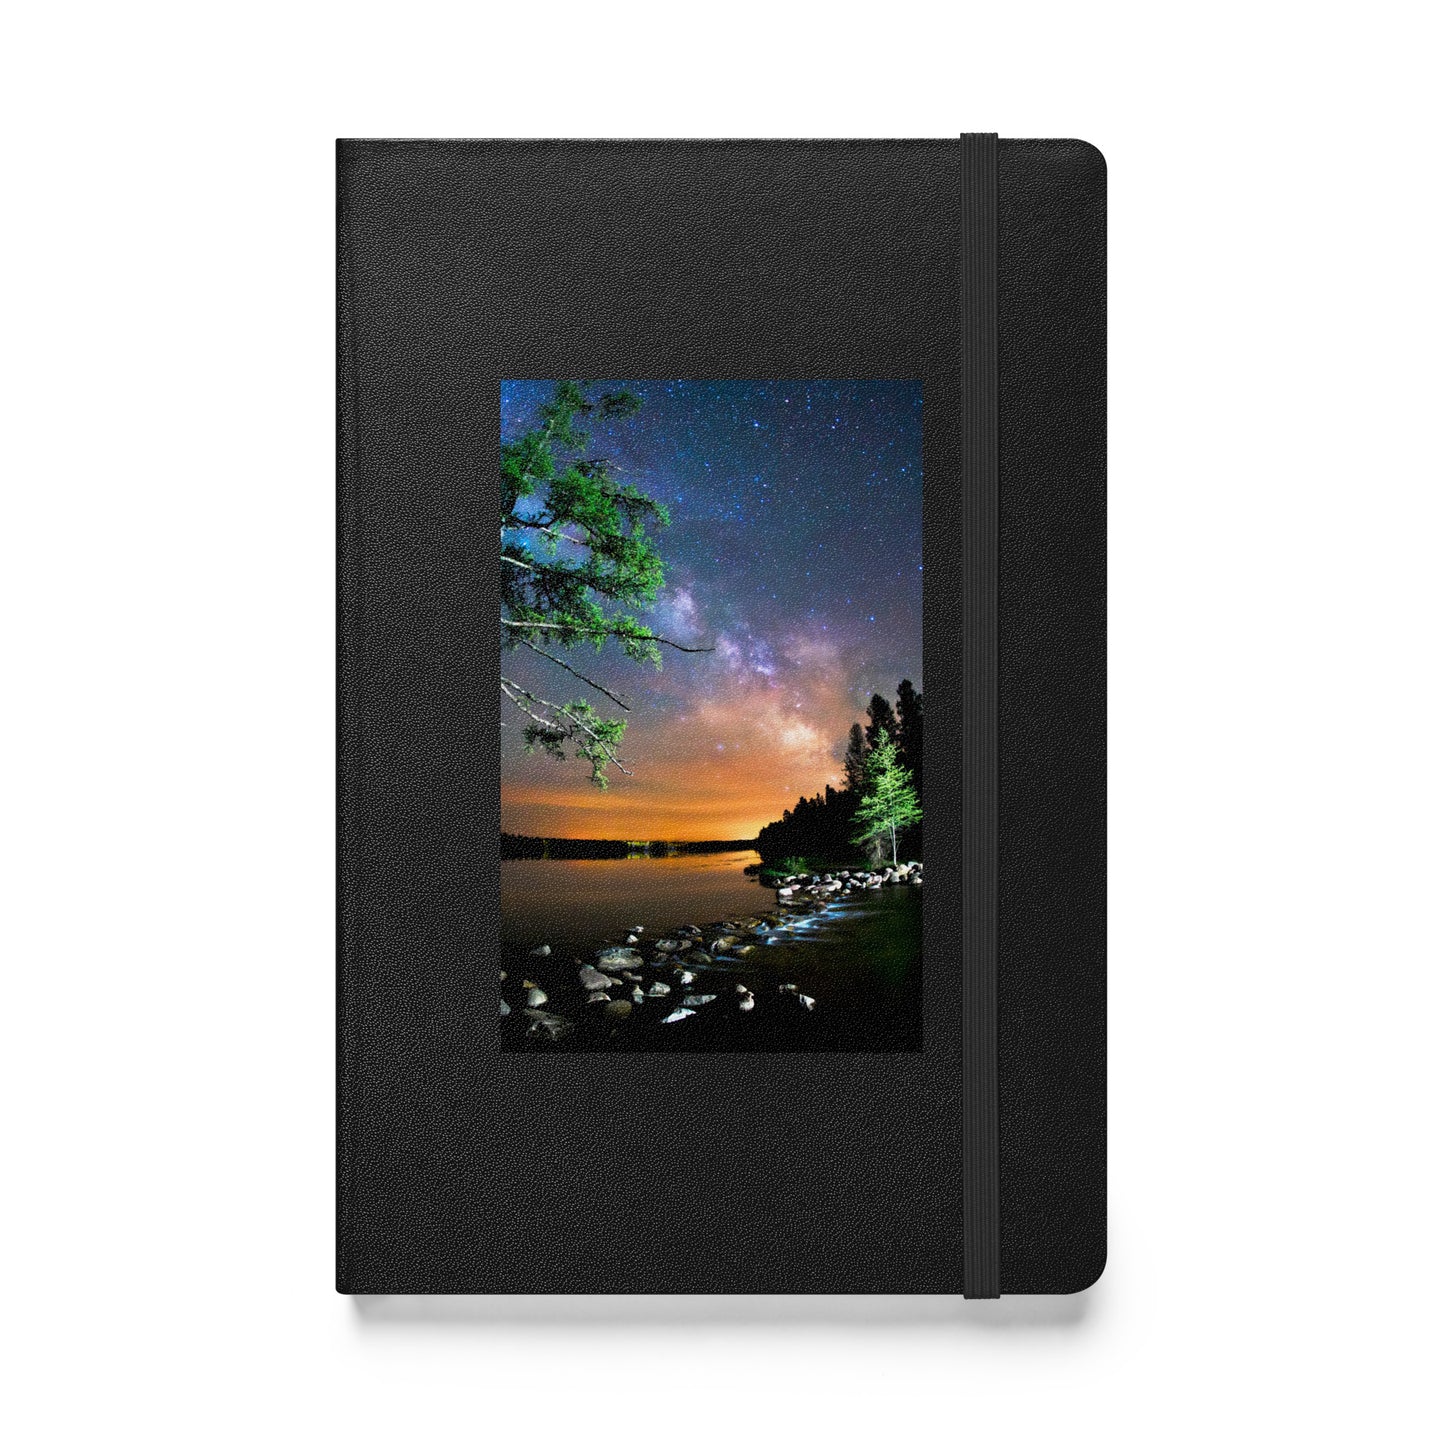 State of Wonders Hardcover Bound Notebook